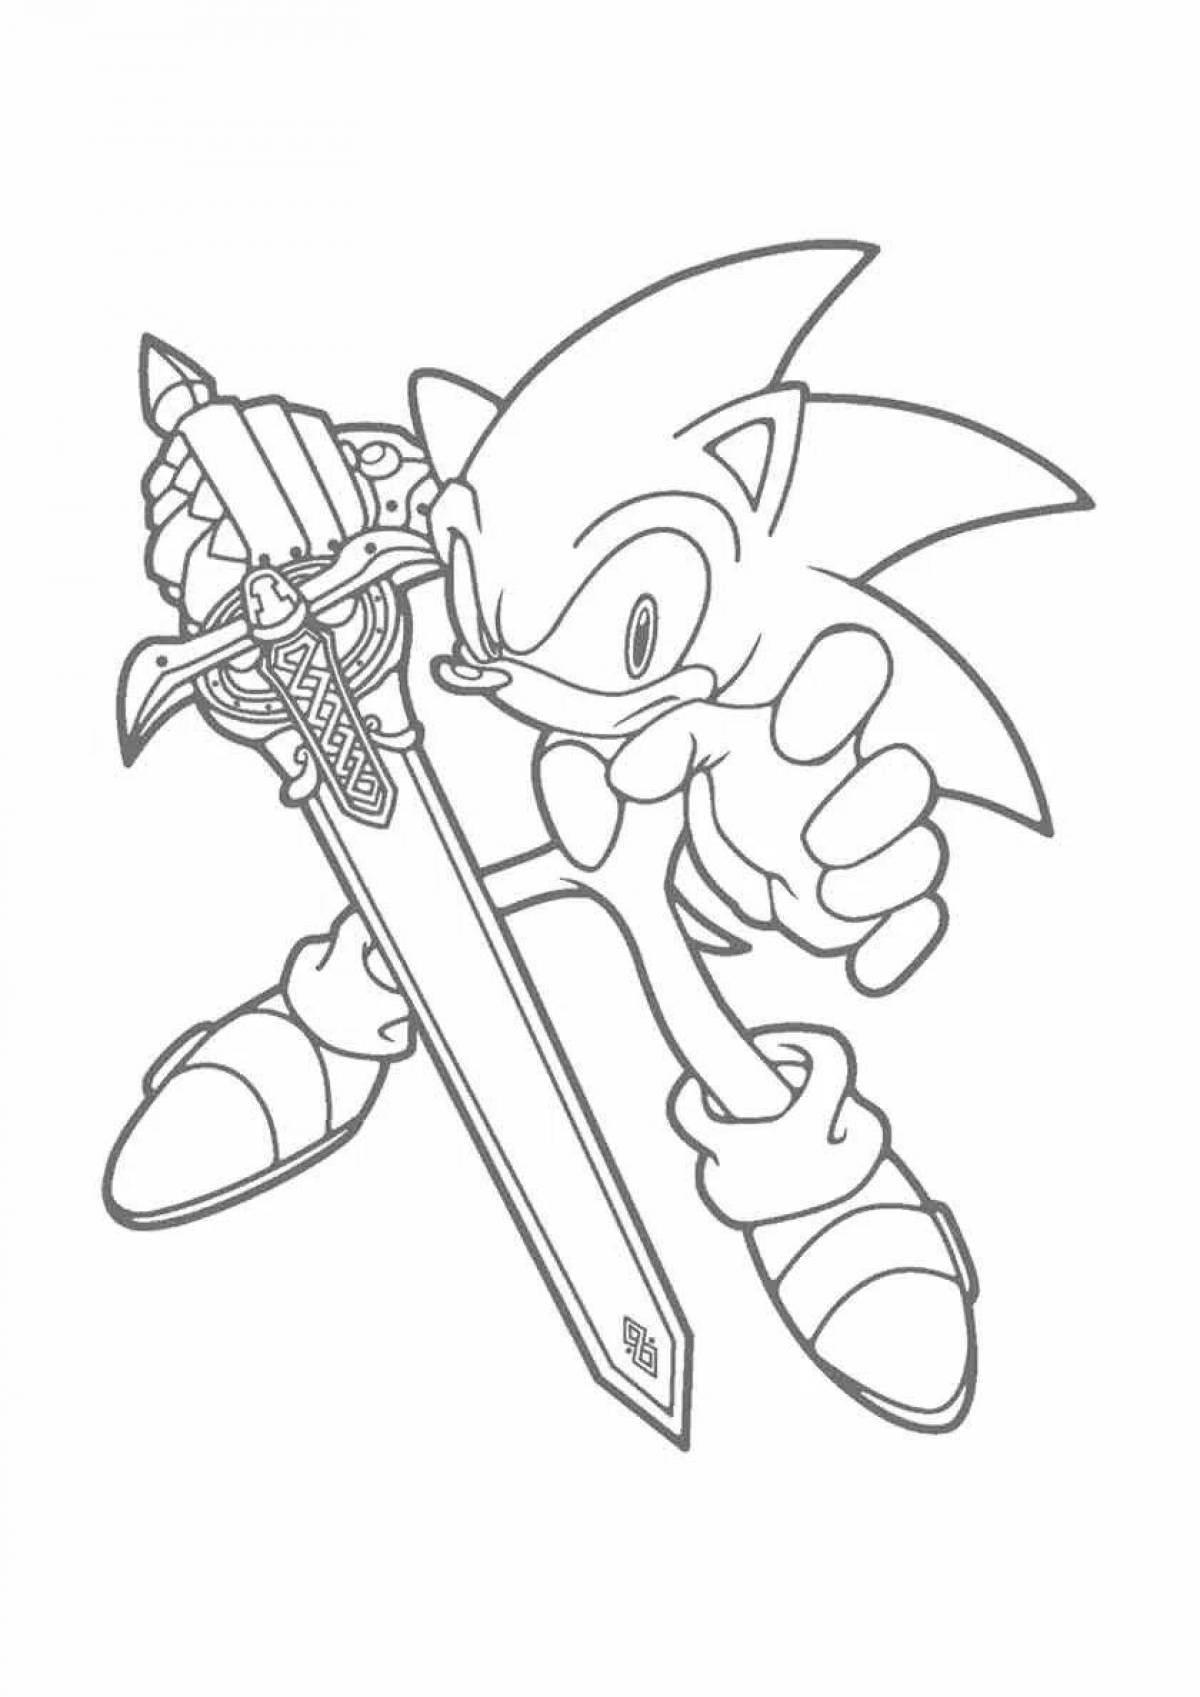 Sonic theos amazing coloring book